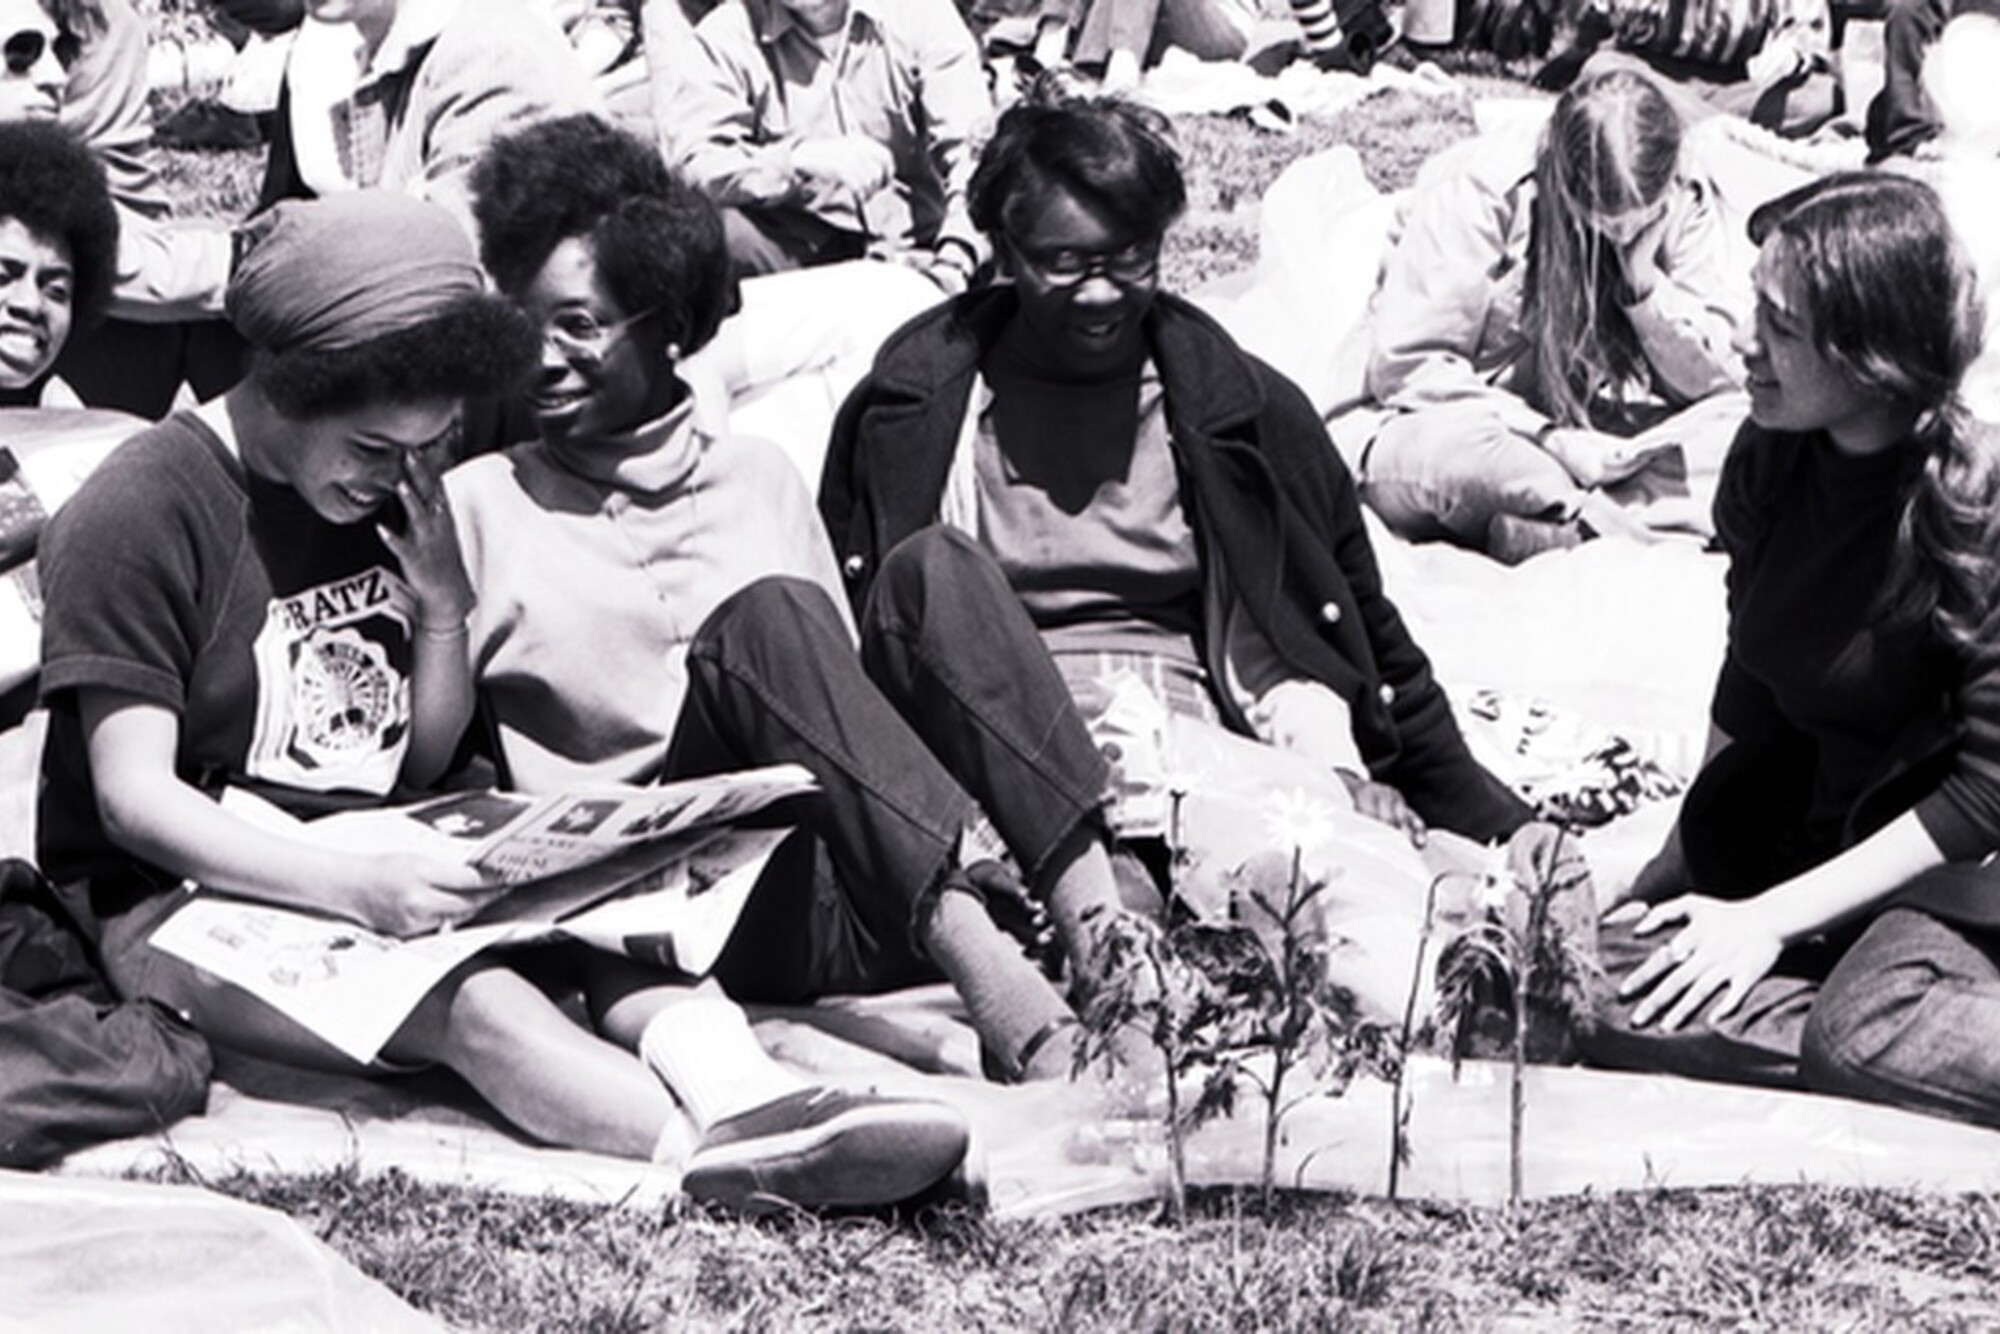 Four people sit on blankets on the grass, smiling.